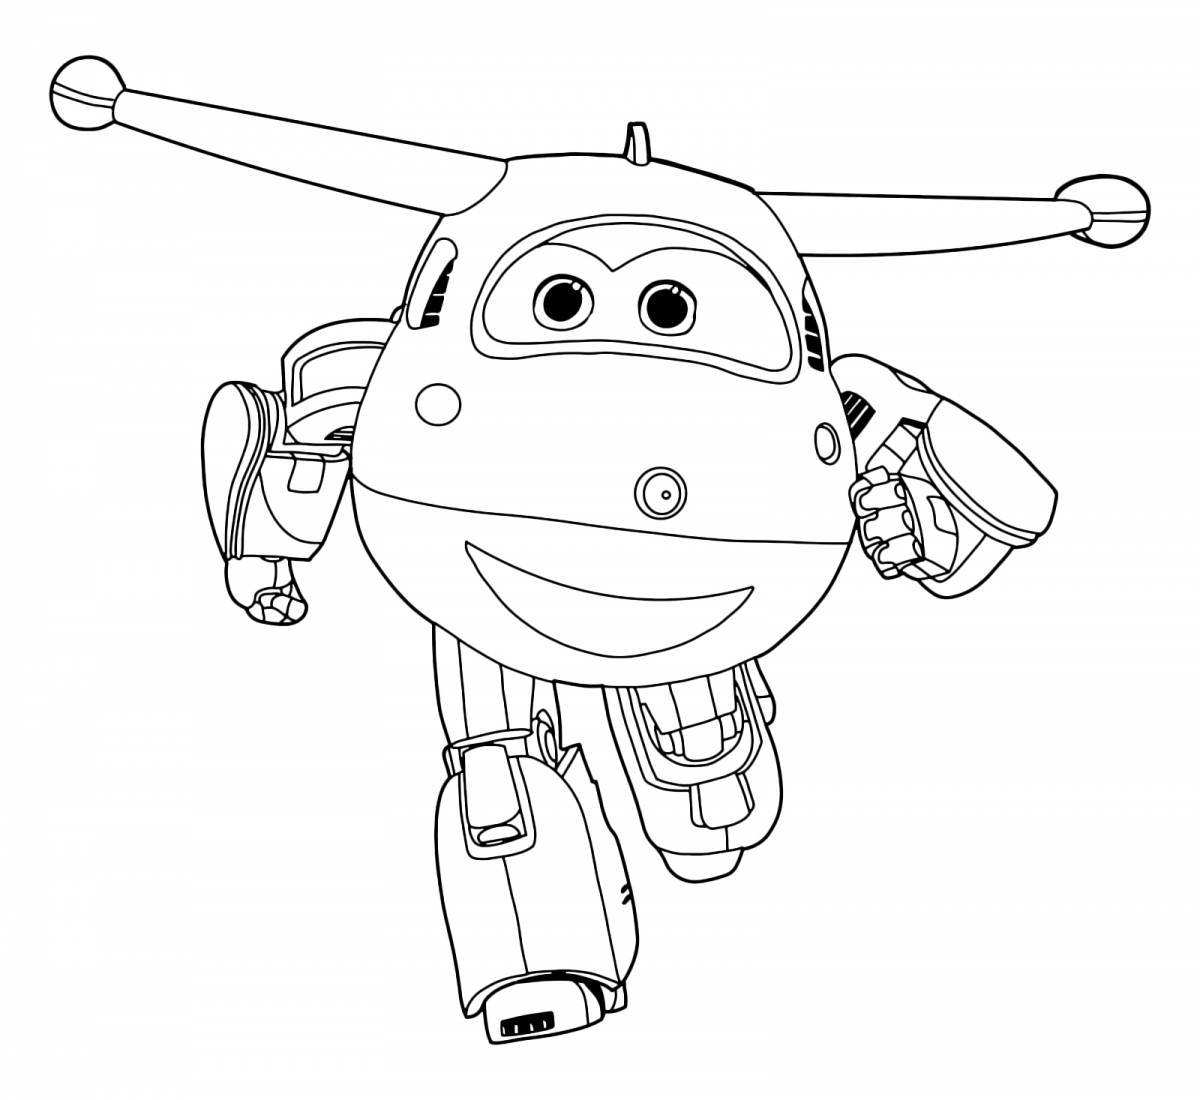 Great super wings coloring pages for kids